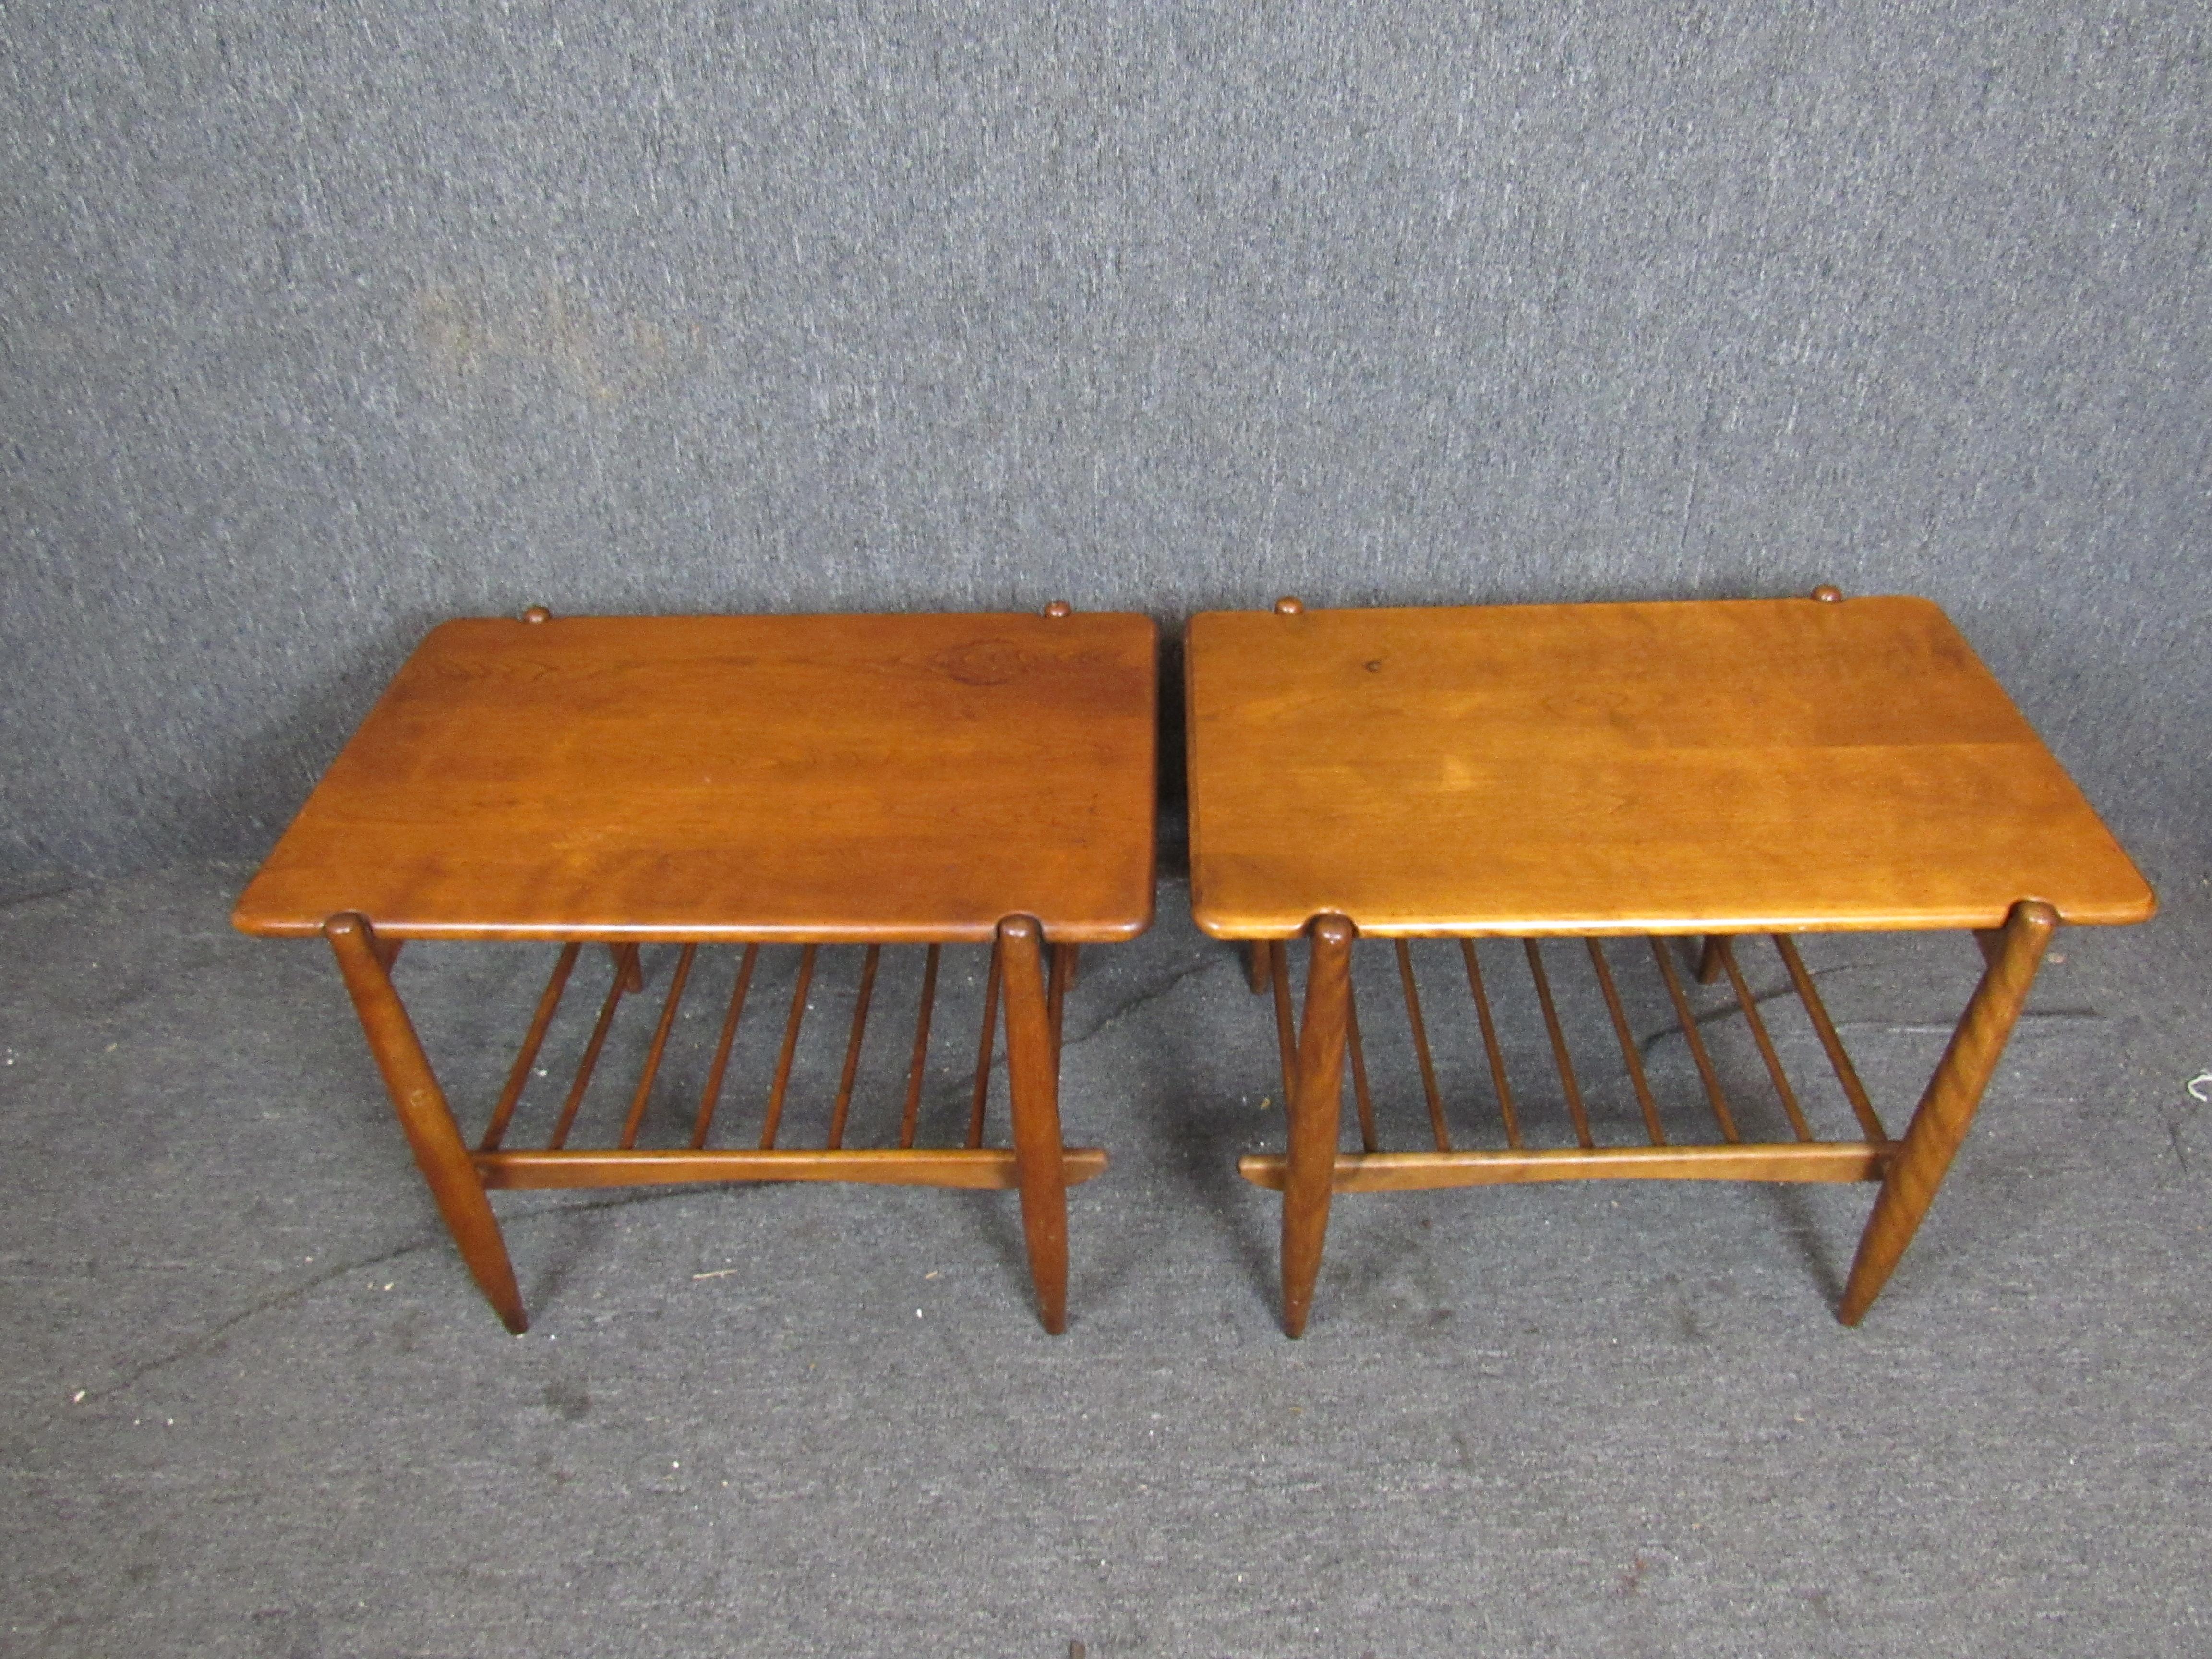 Gorgeous pair of vintage solid wood side tables made by Massachusetts' famous Conant Ball Company. Sleek tapered legs and a doweled bottom tier evoke Eastern design influences, while ample American maple table tops offer versatility in use. 
Please